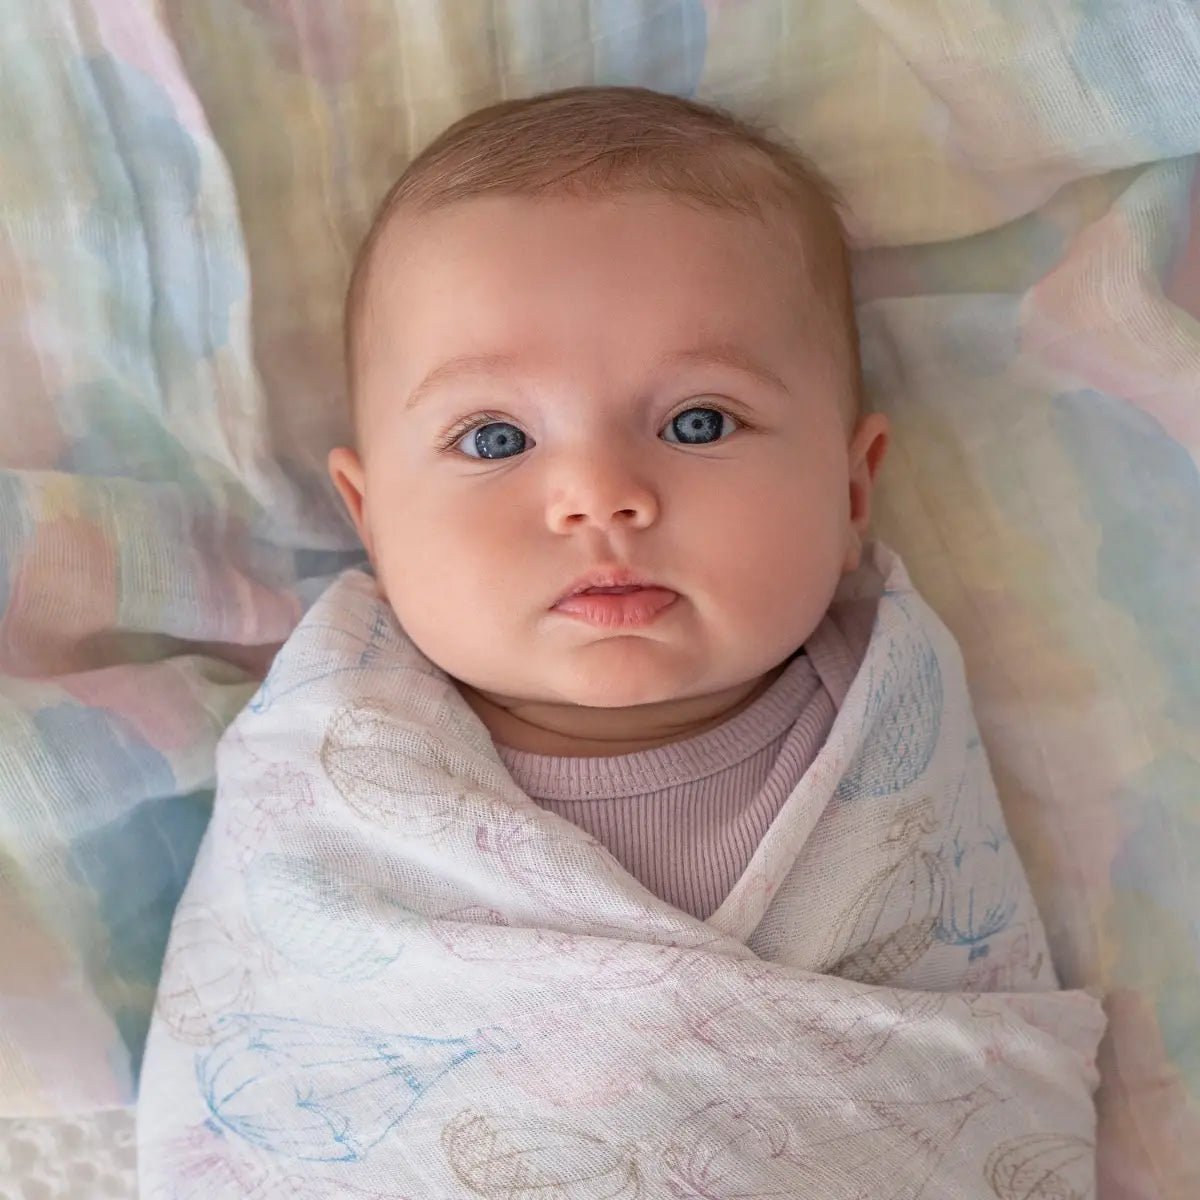 Bambinista-ADEN + ANAIS-Blankets-ADEN + ANAIS Cotton Muslin Swaddles 4 pack - Above the Clouds